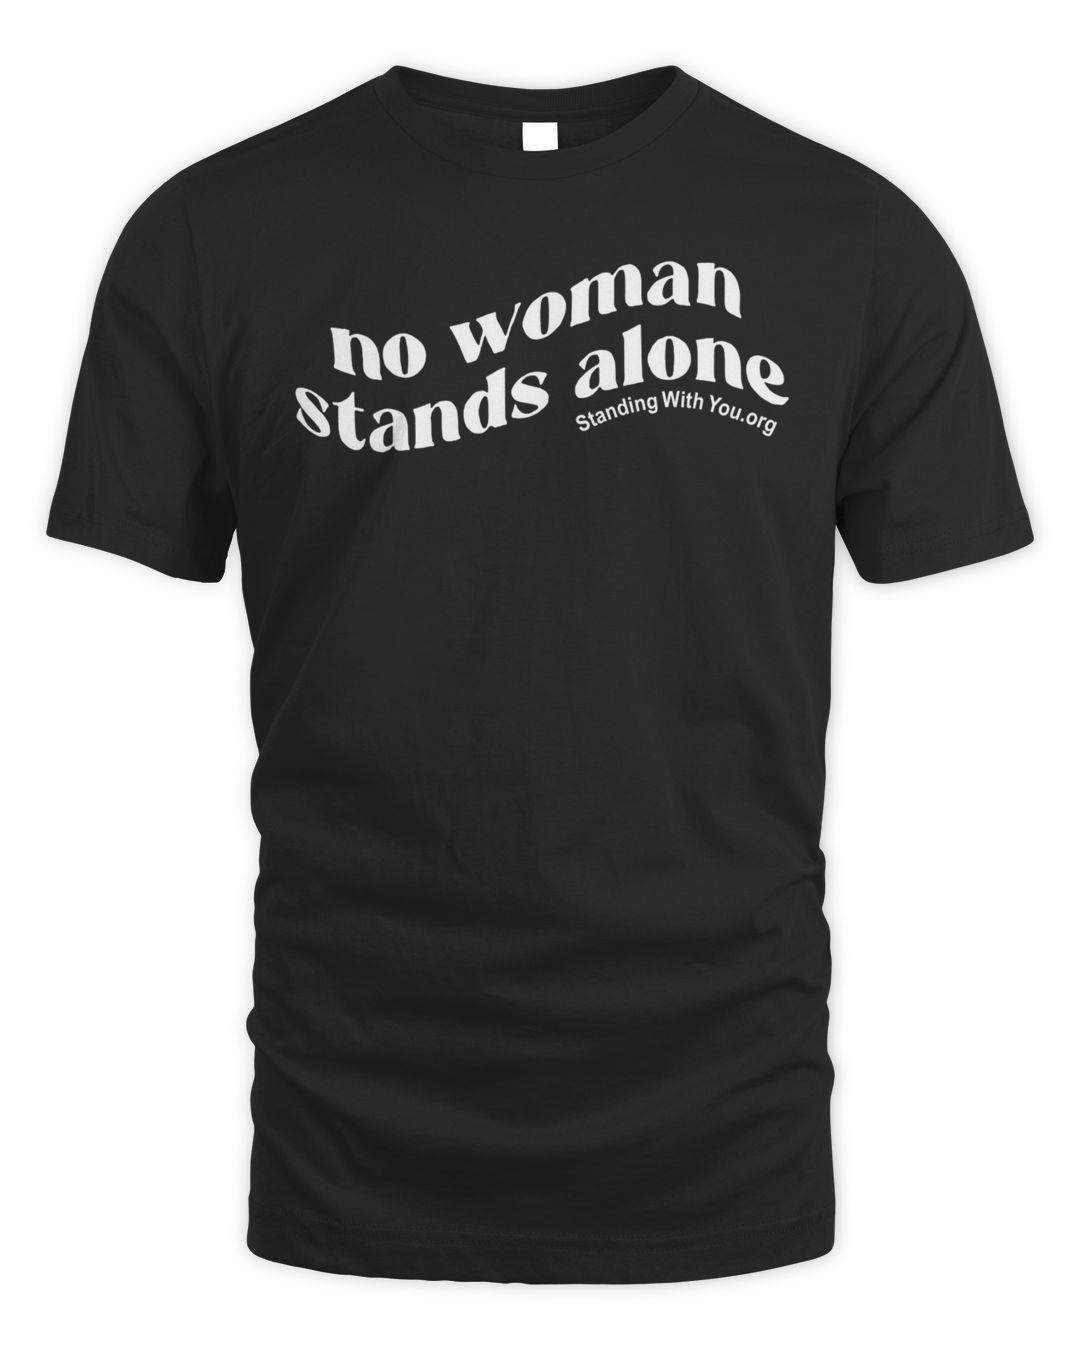 No Woman Stands Alone Shirt